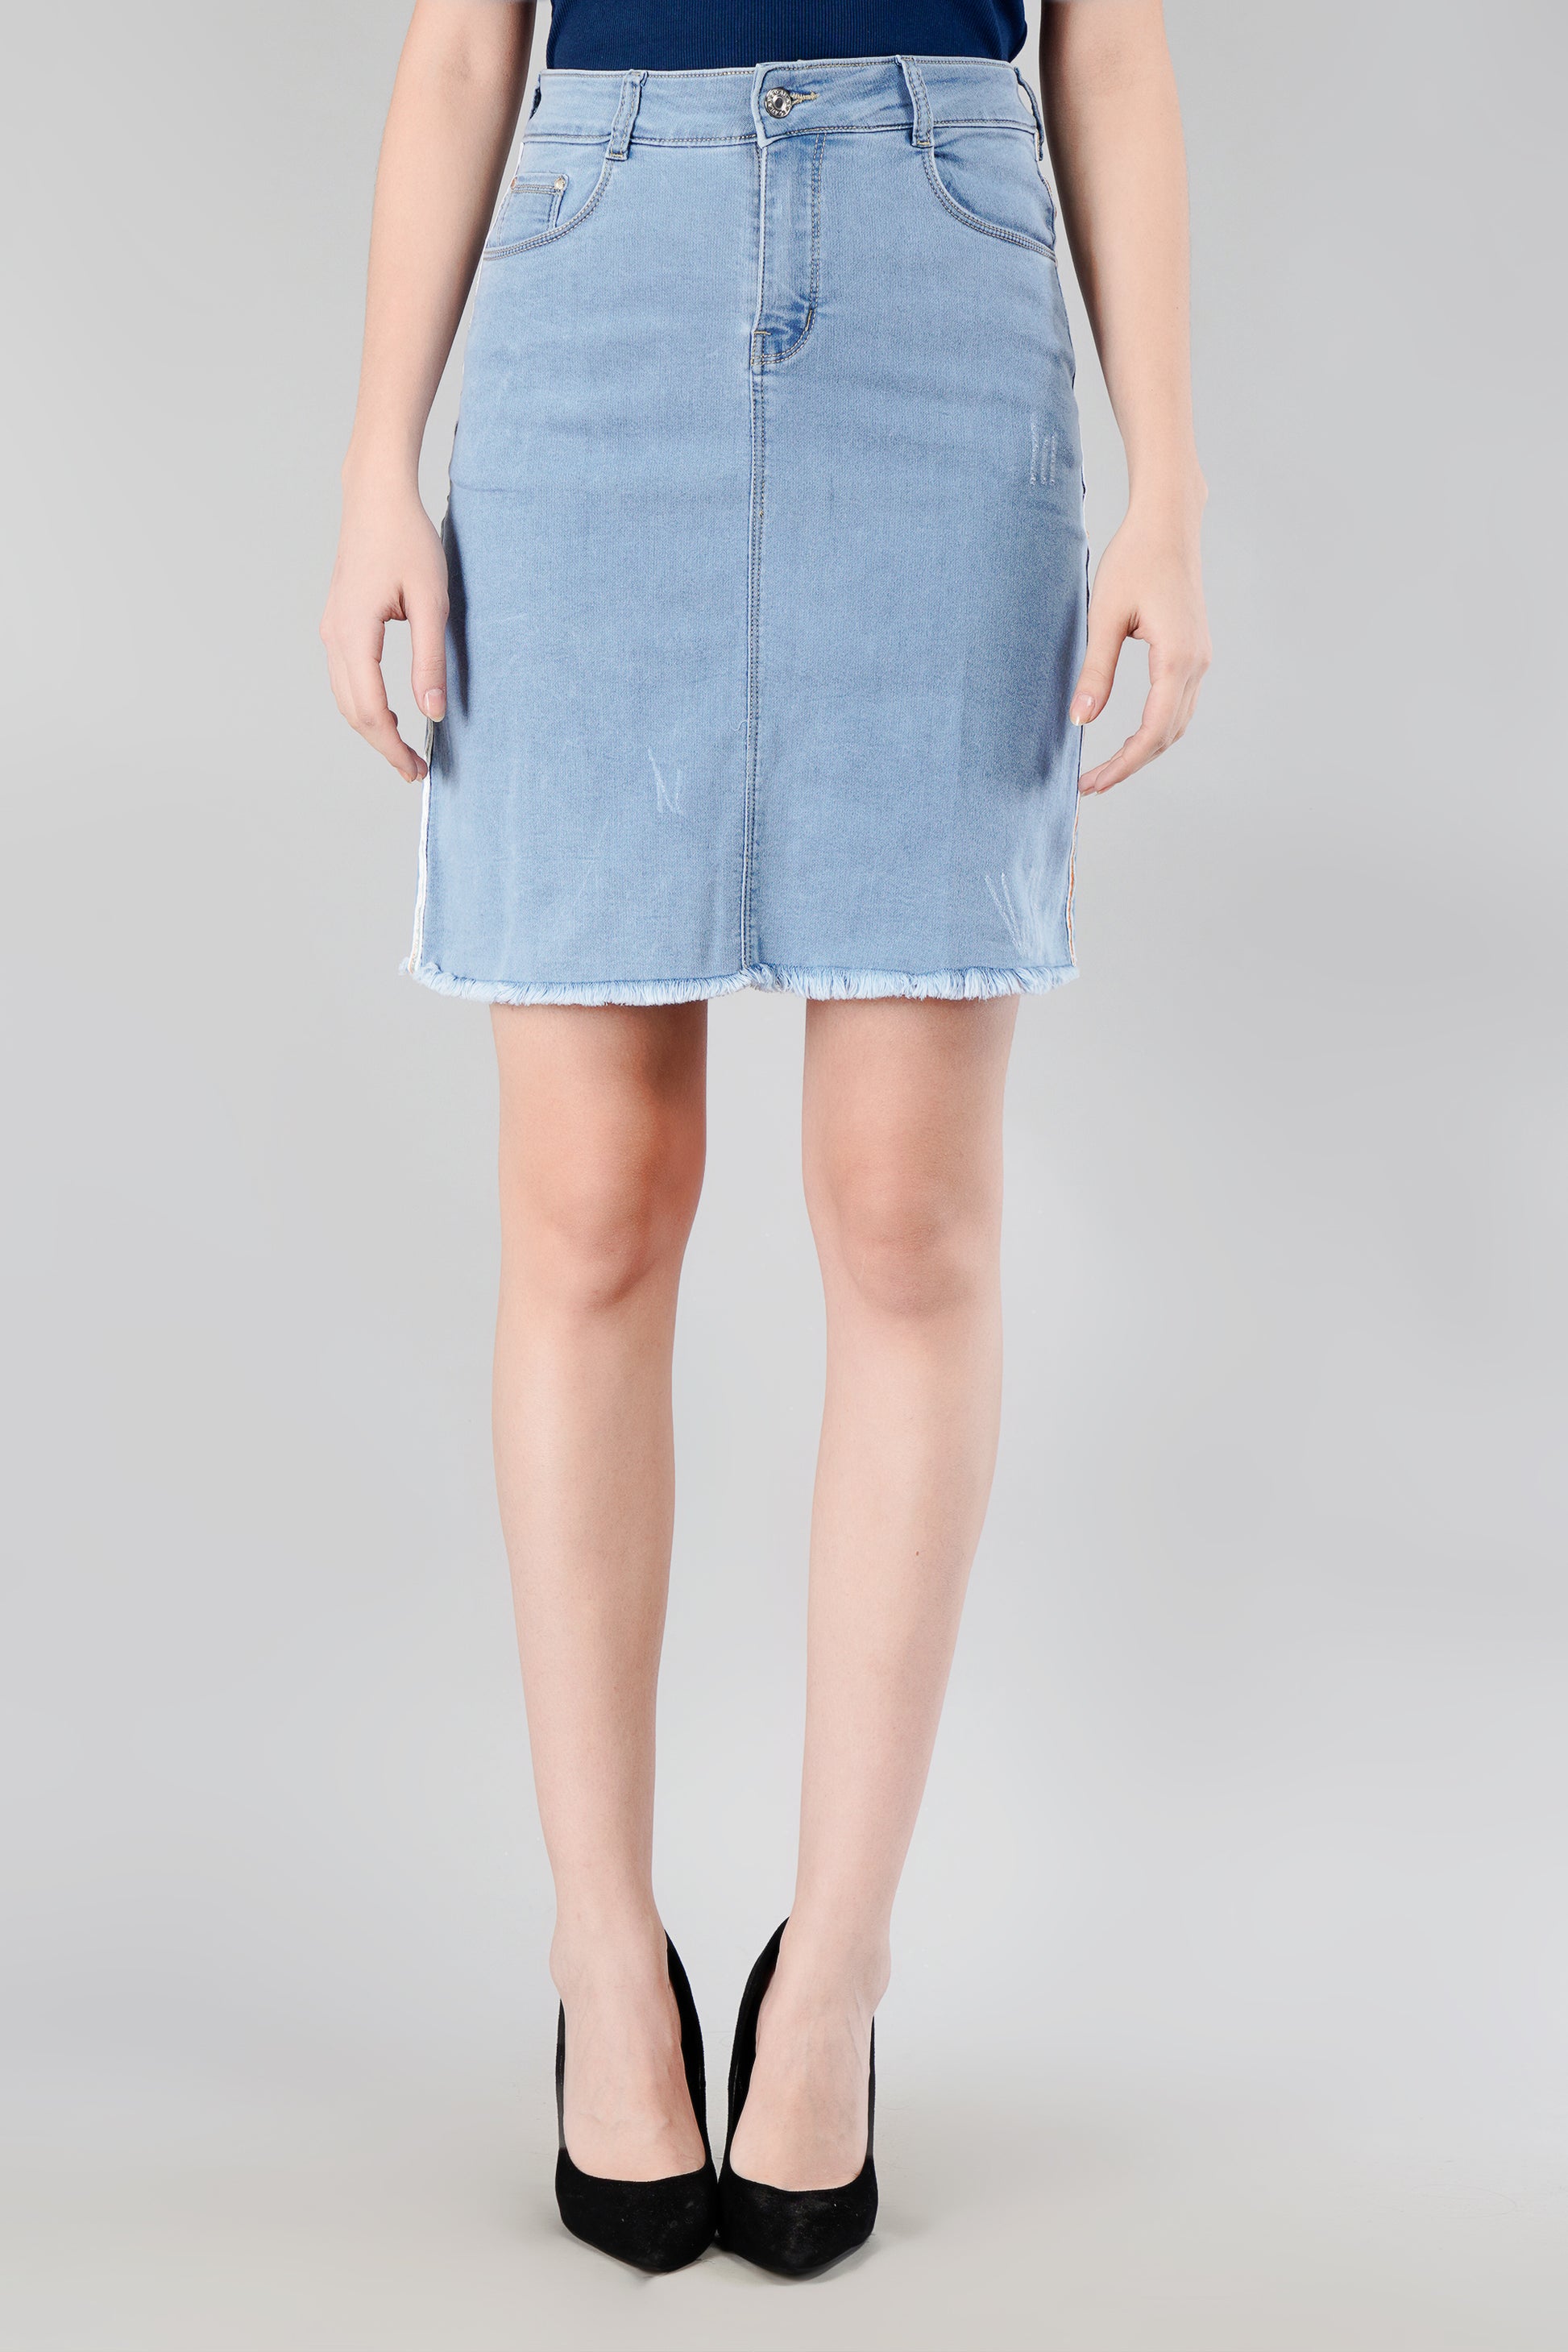 Women's Denim Skirts in Light Blue by Be Simple